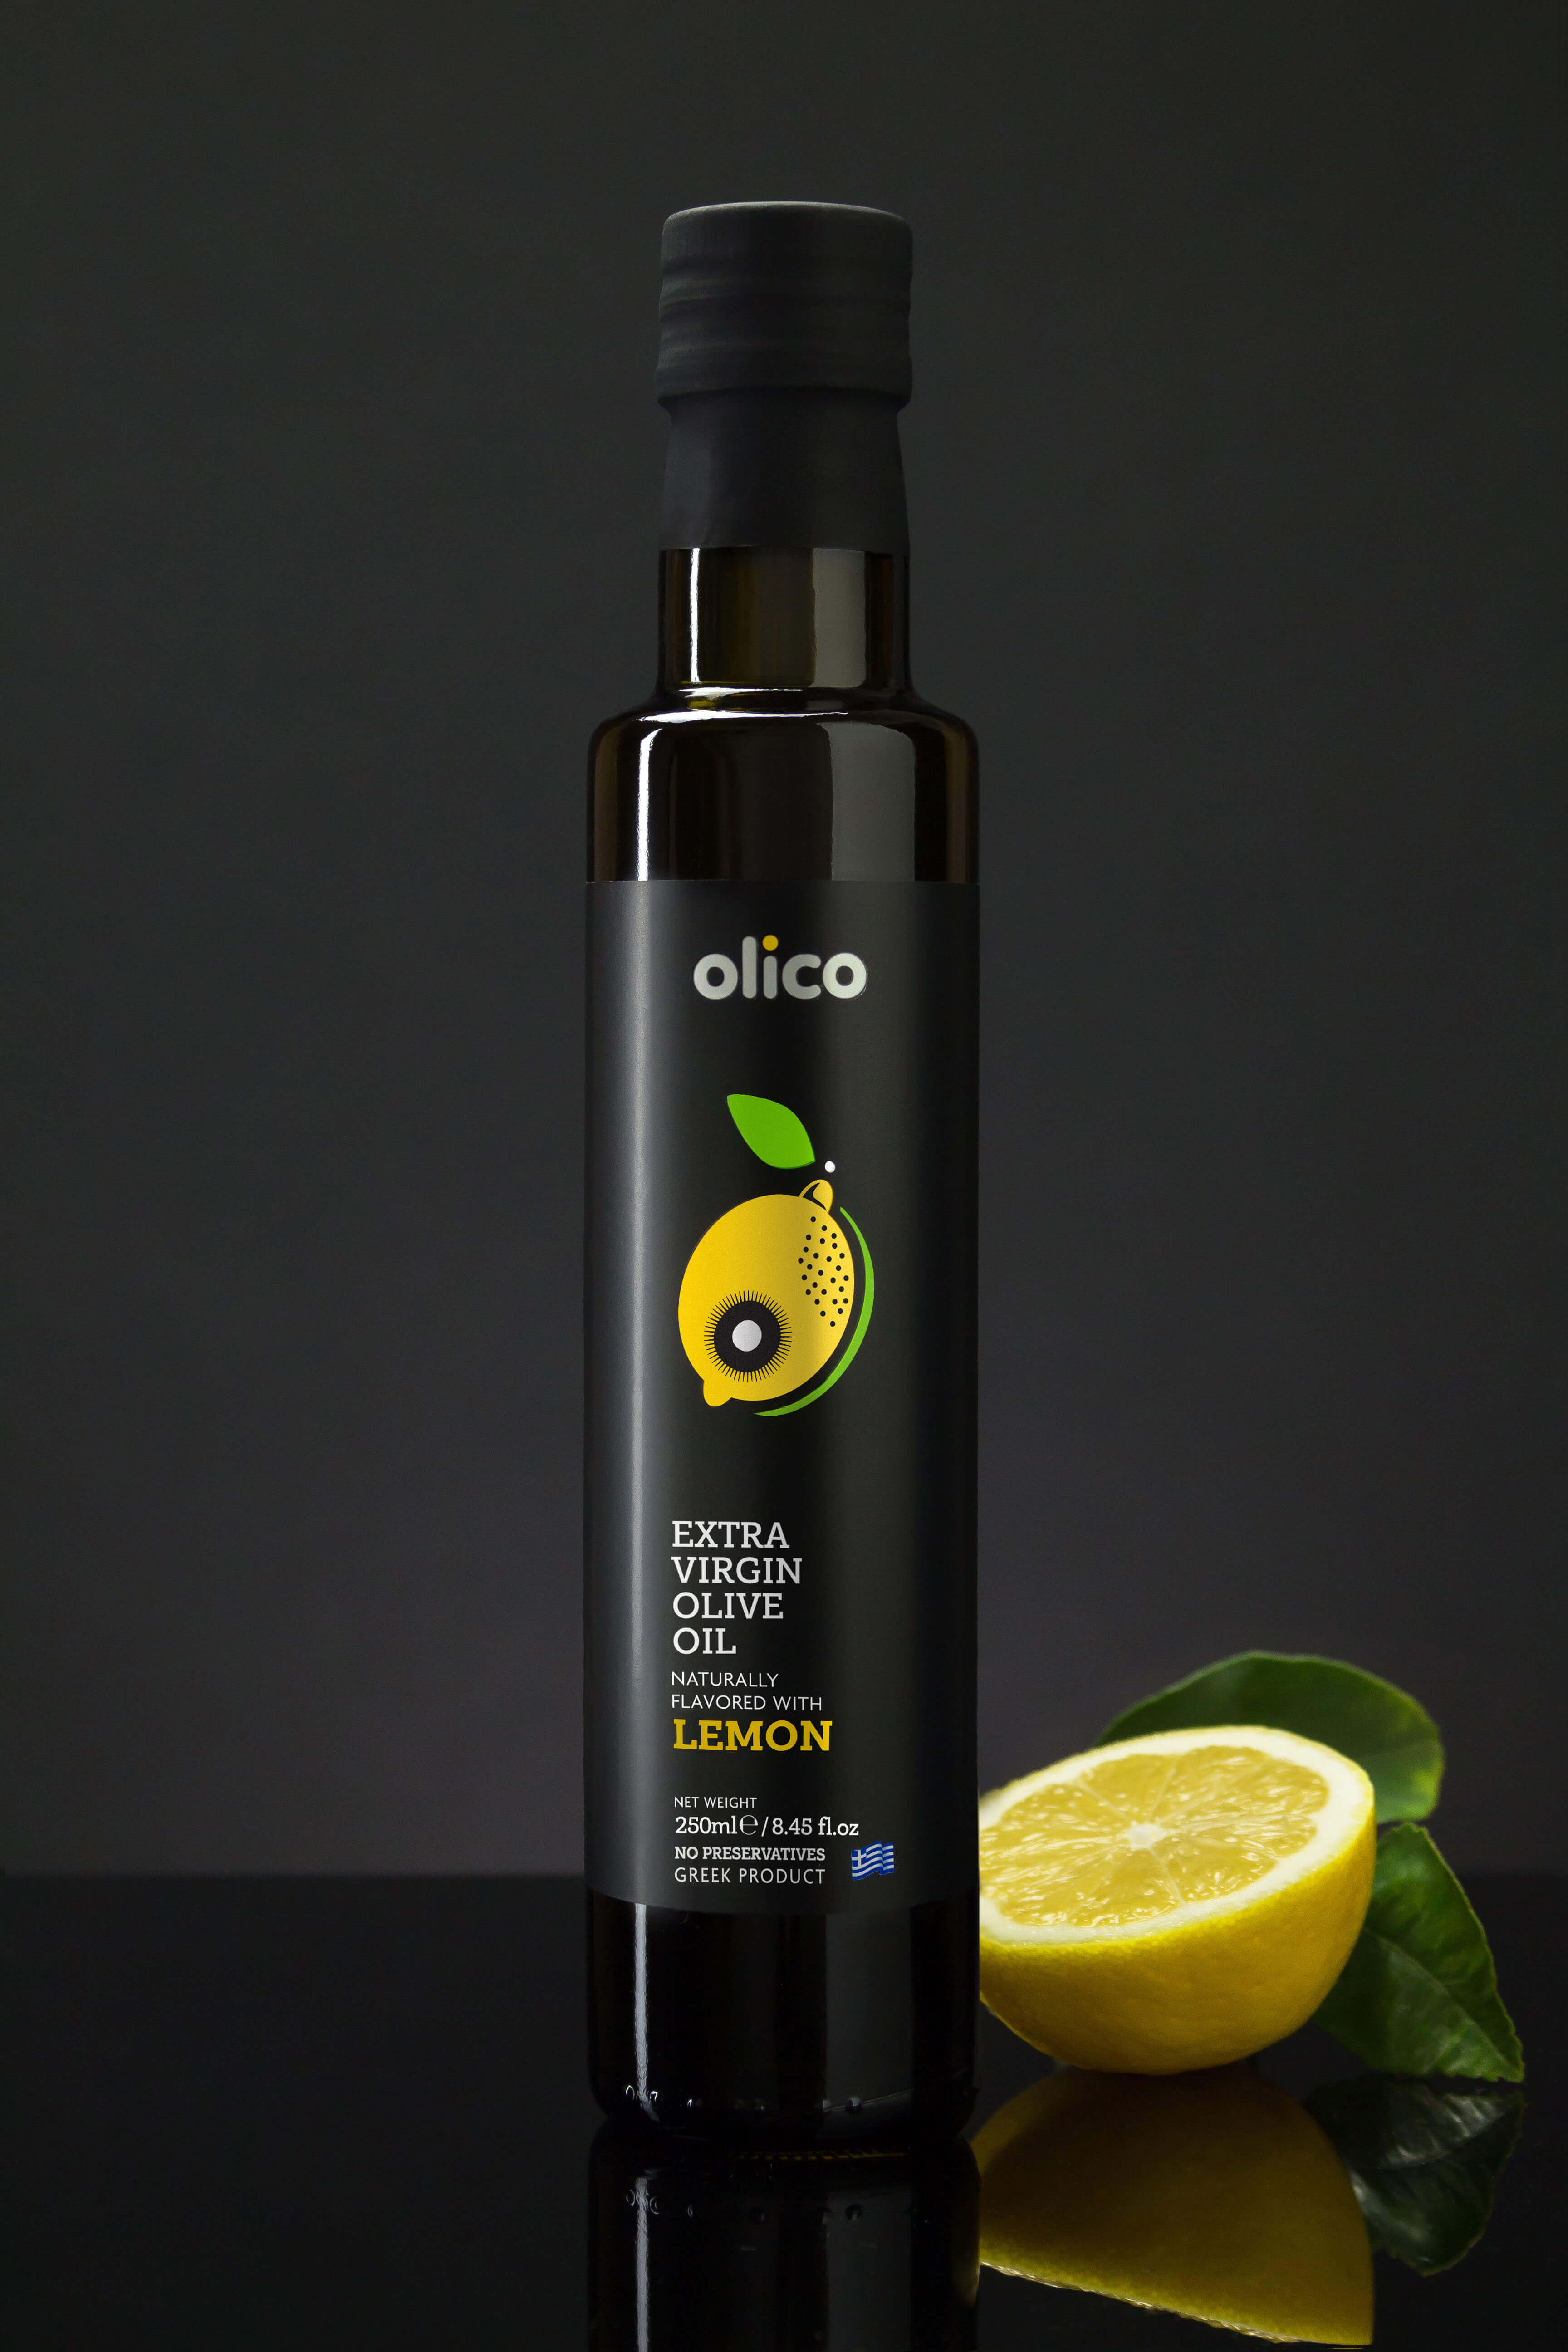 GOURMET EXTRA VIRGIN OLIVE OIL NATURALLY FLAVORED WITH LEMON